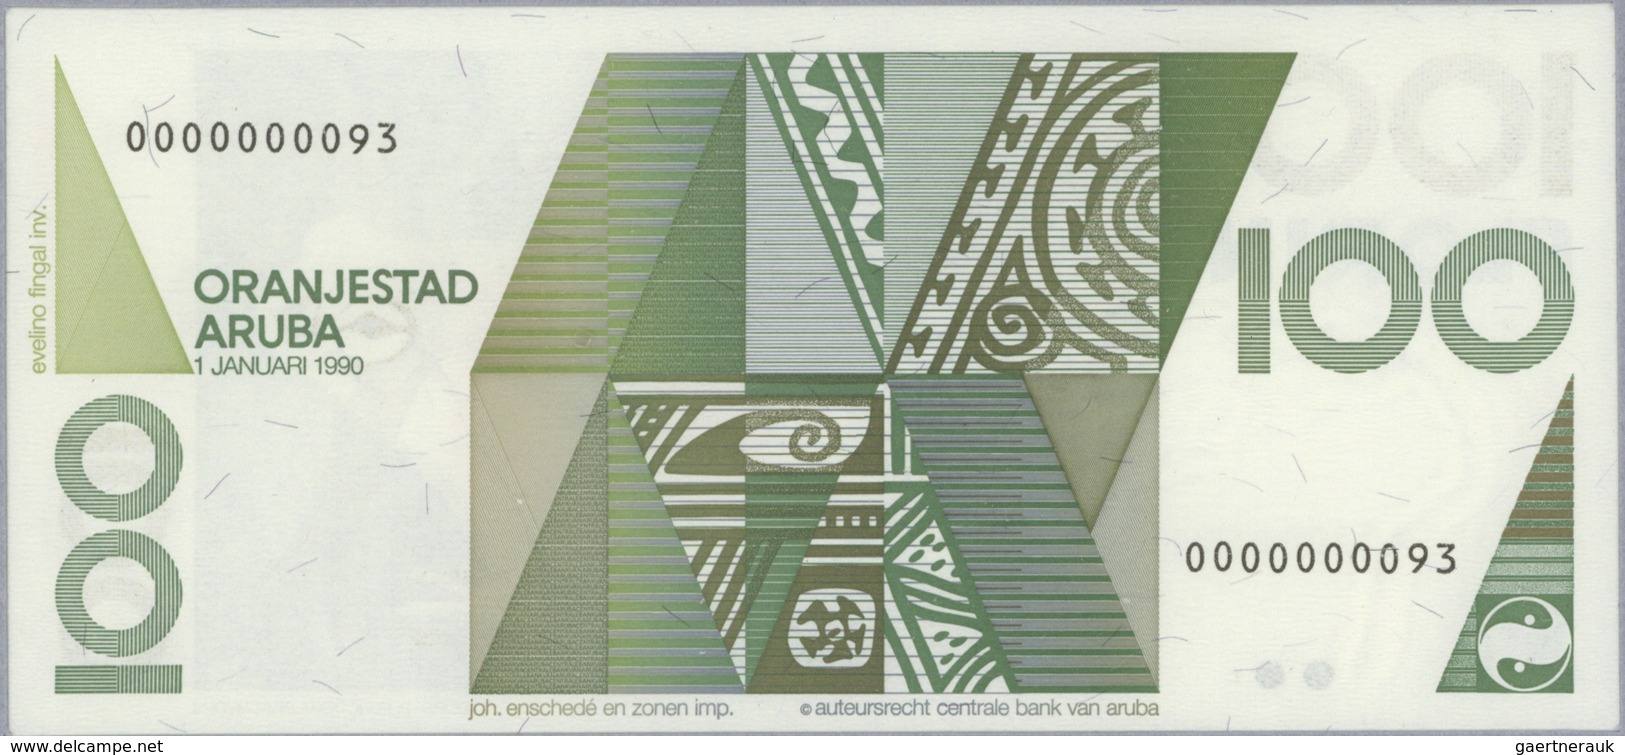 01026 Aruba: official collectors book issued by the Central Bank of Aruba commemorating the first Banknote